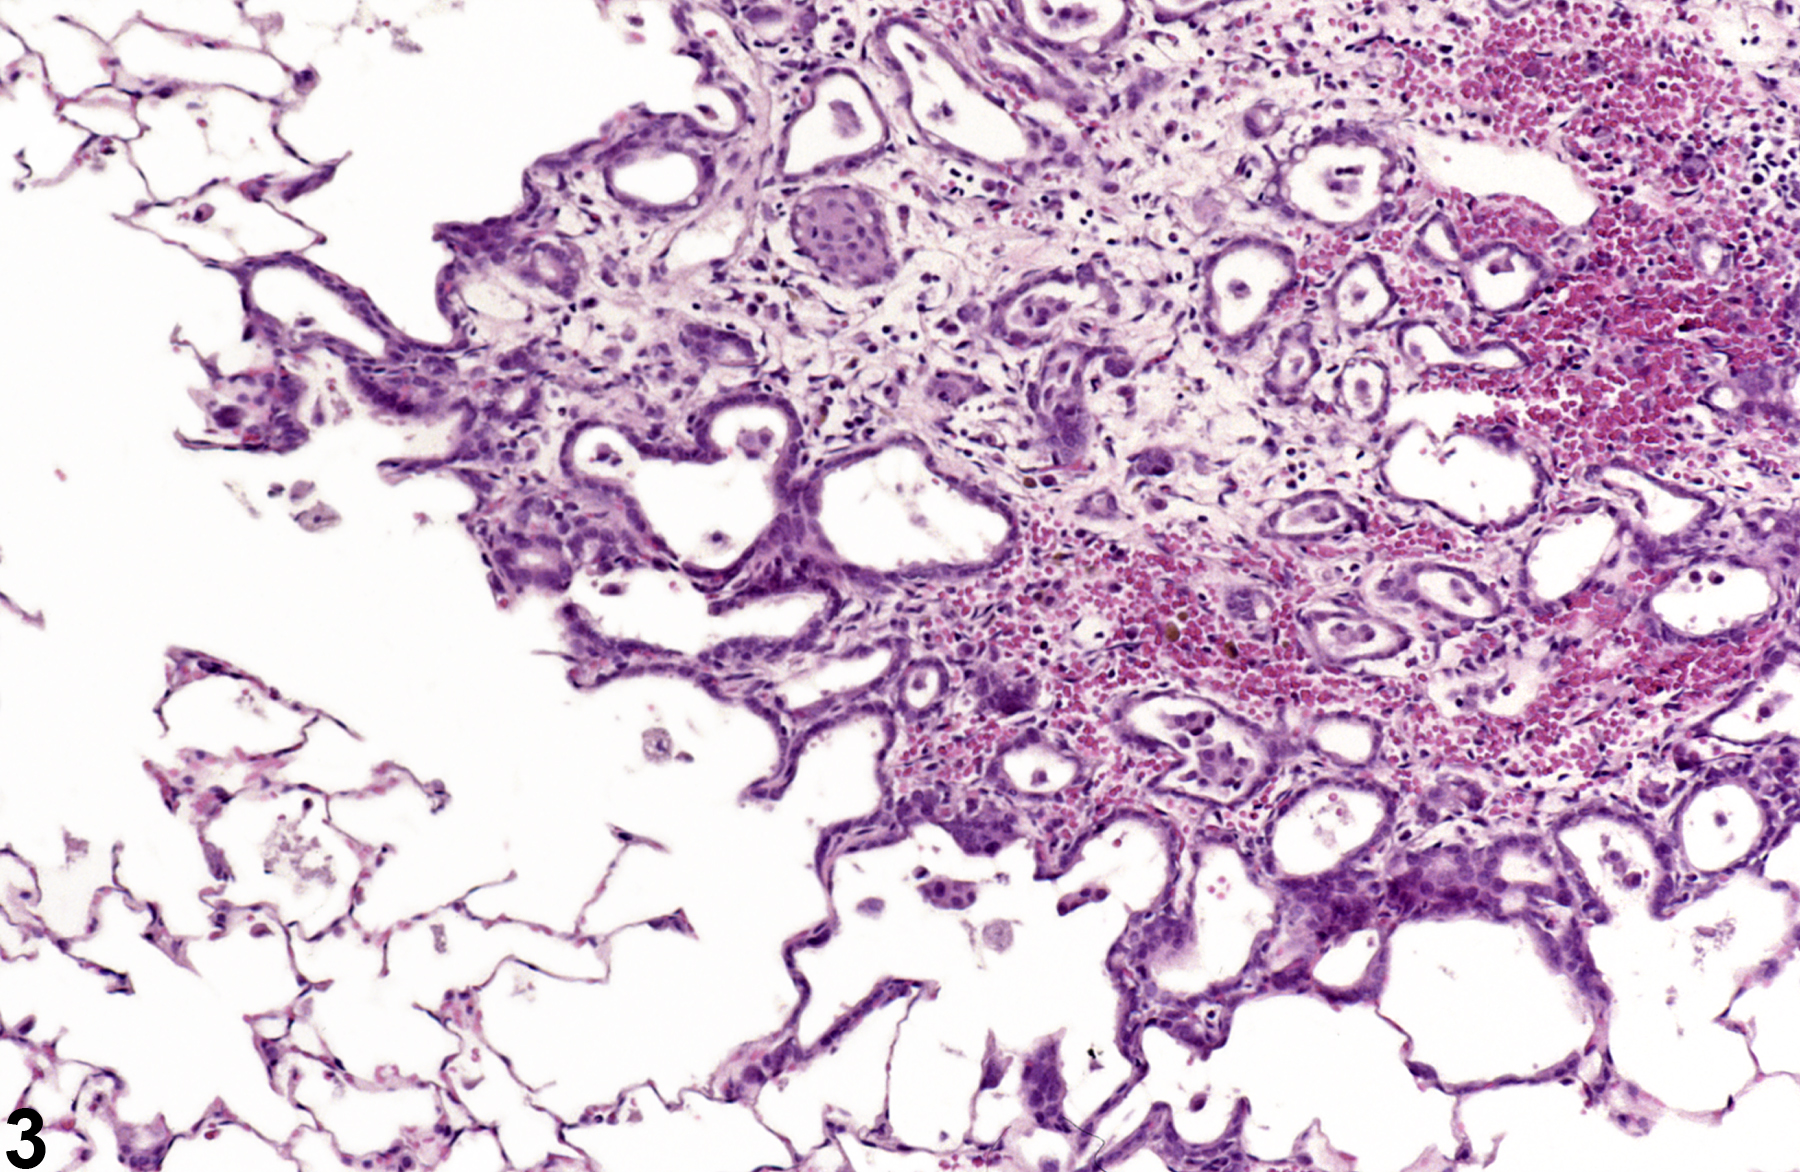 Image of hemorrhage in the lung from a male F344/N rat in a chronic study